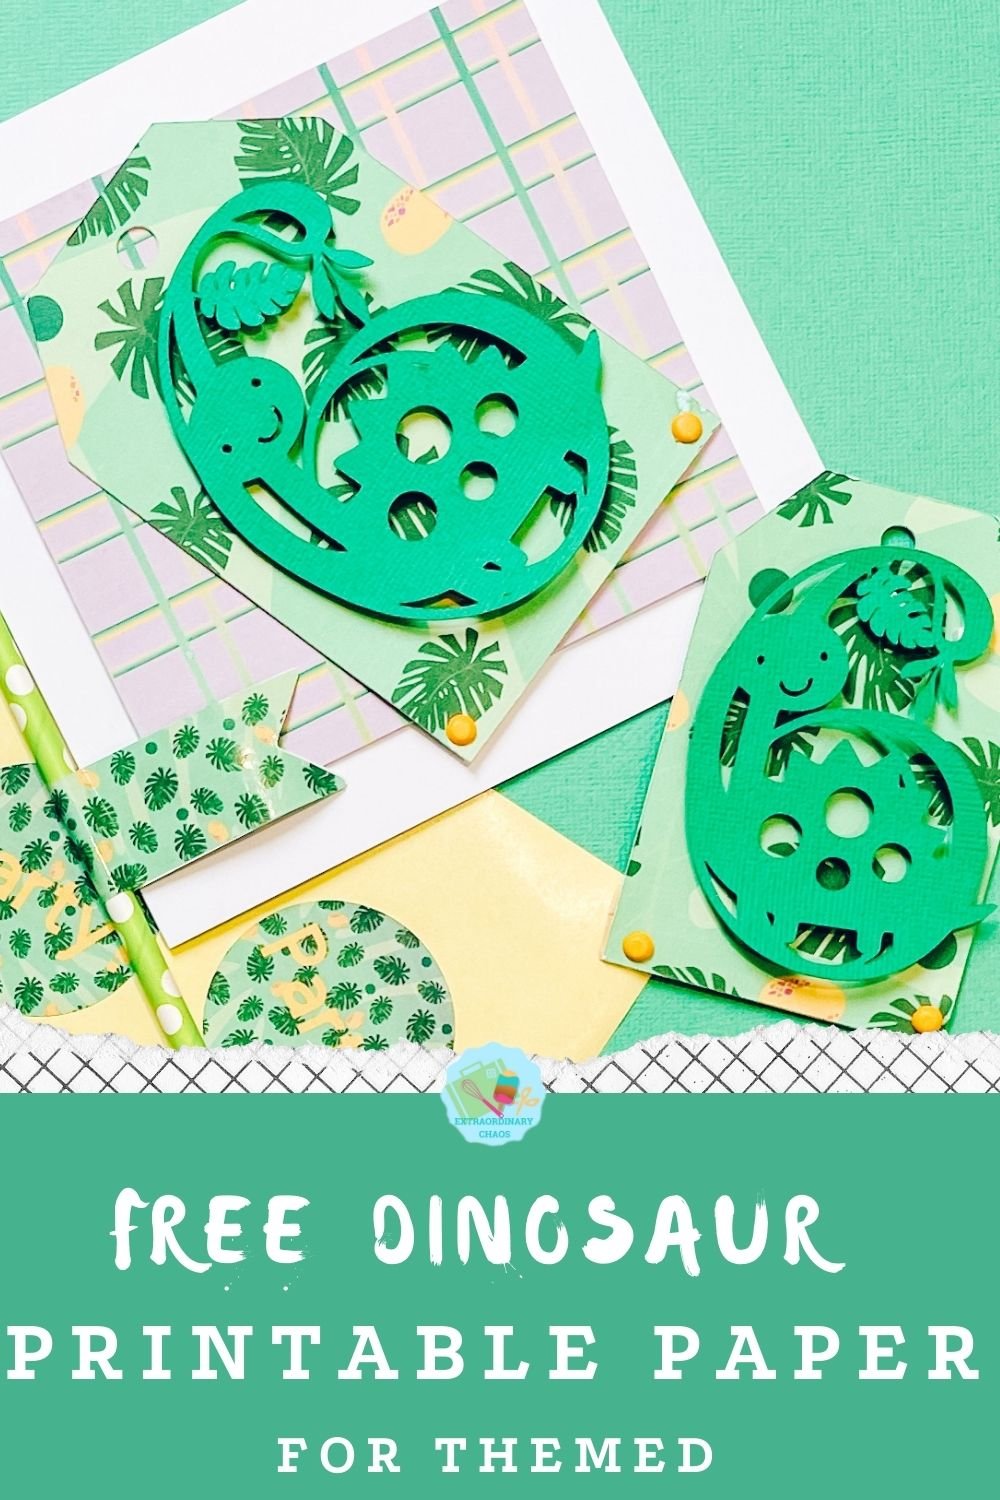 Digital papers for  creating Dinosaur themed parties